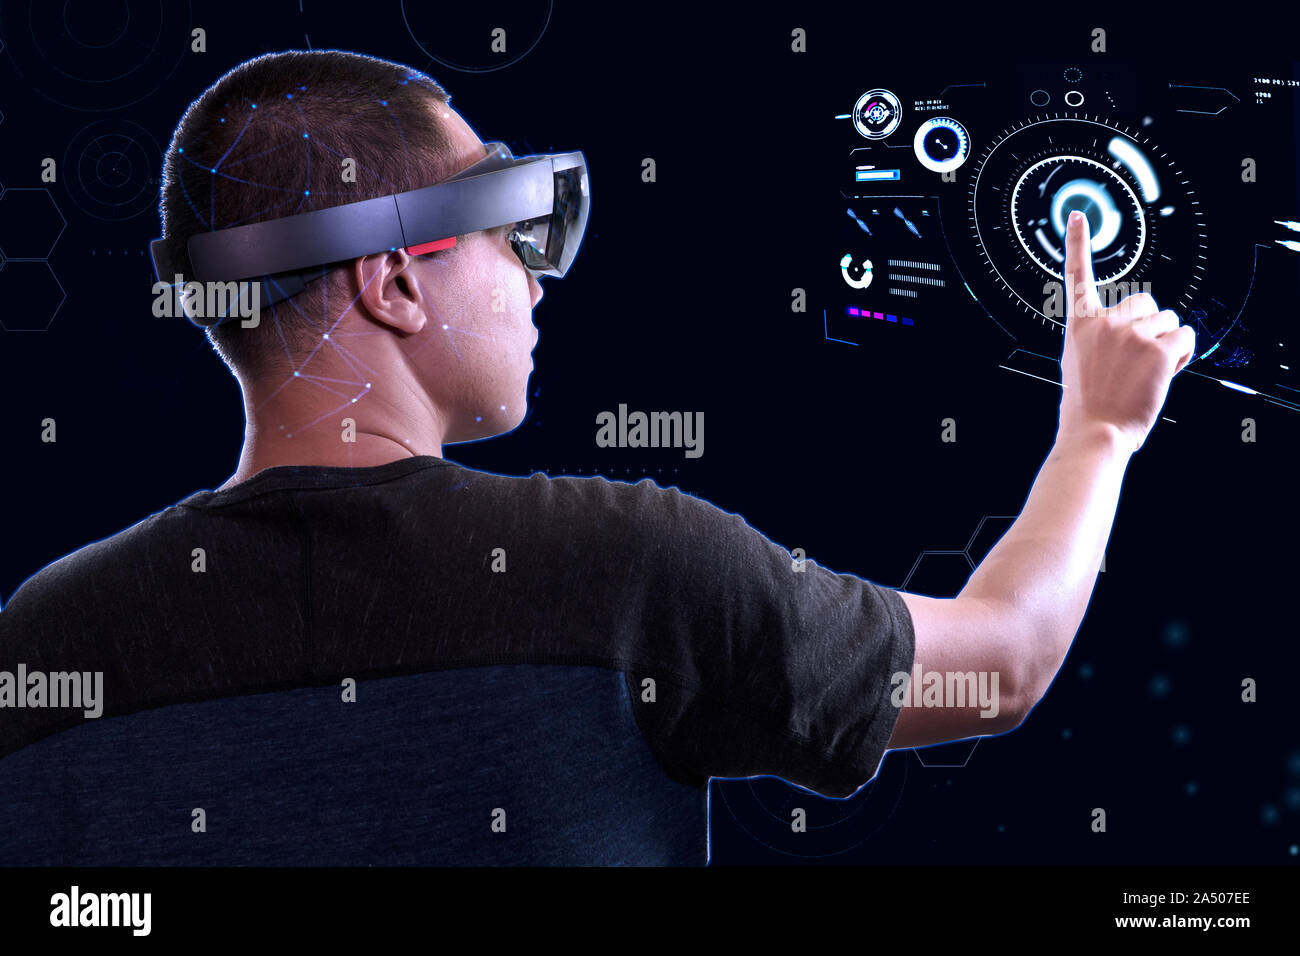 Young men trying Mixed reality glasses with interactive panel in the virtual world. Future Advanced Technology concept Stock Photo